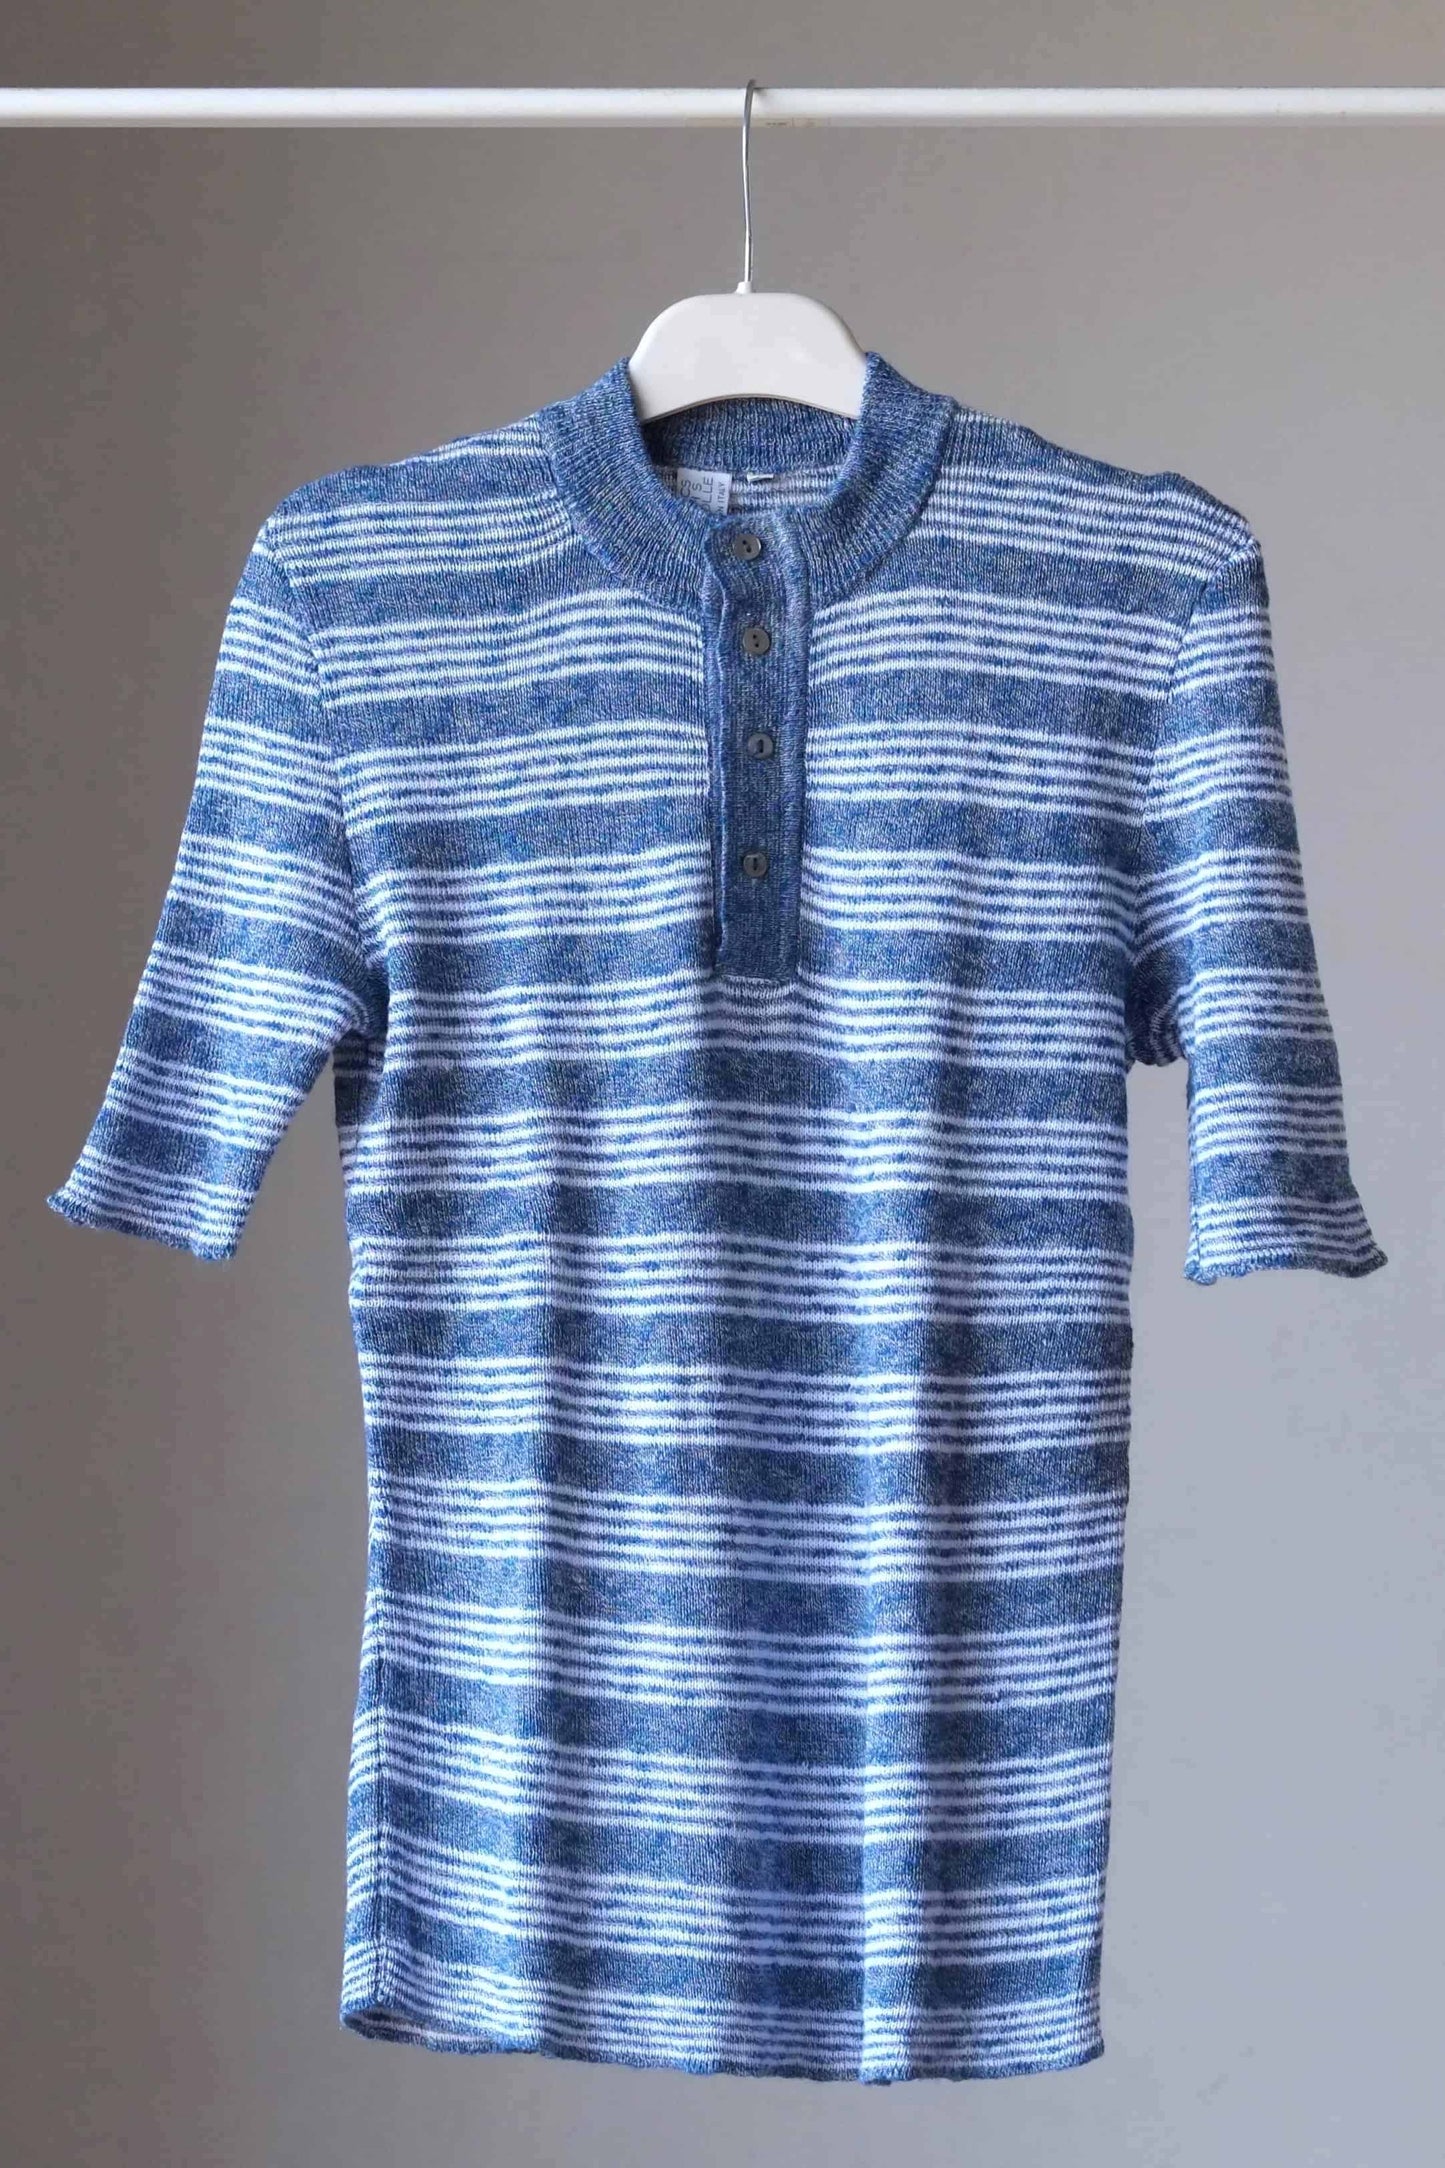 70's Women's Knitted Top blue stripes